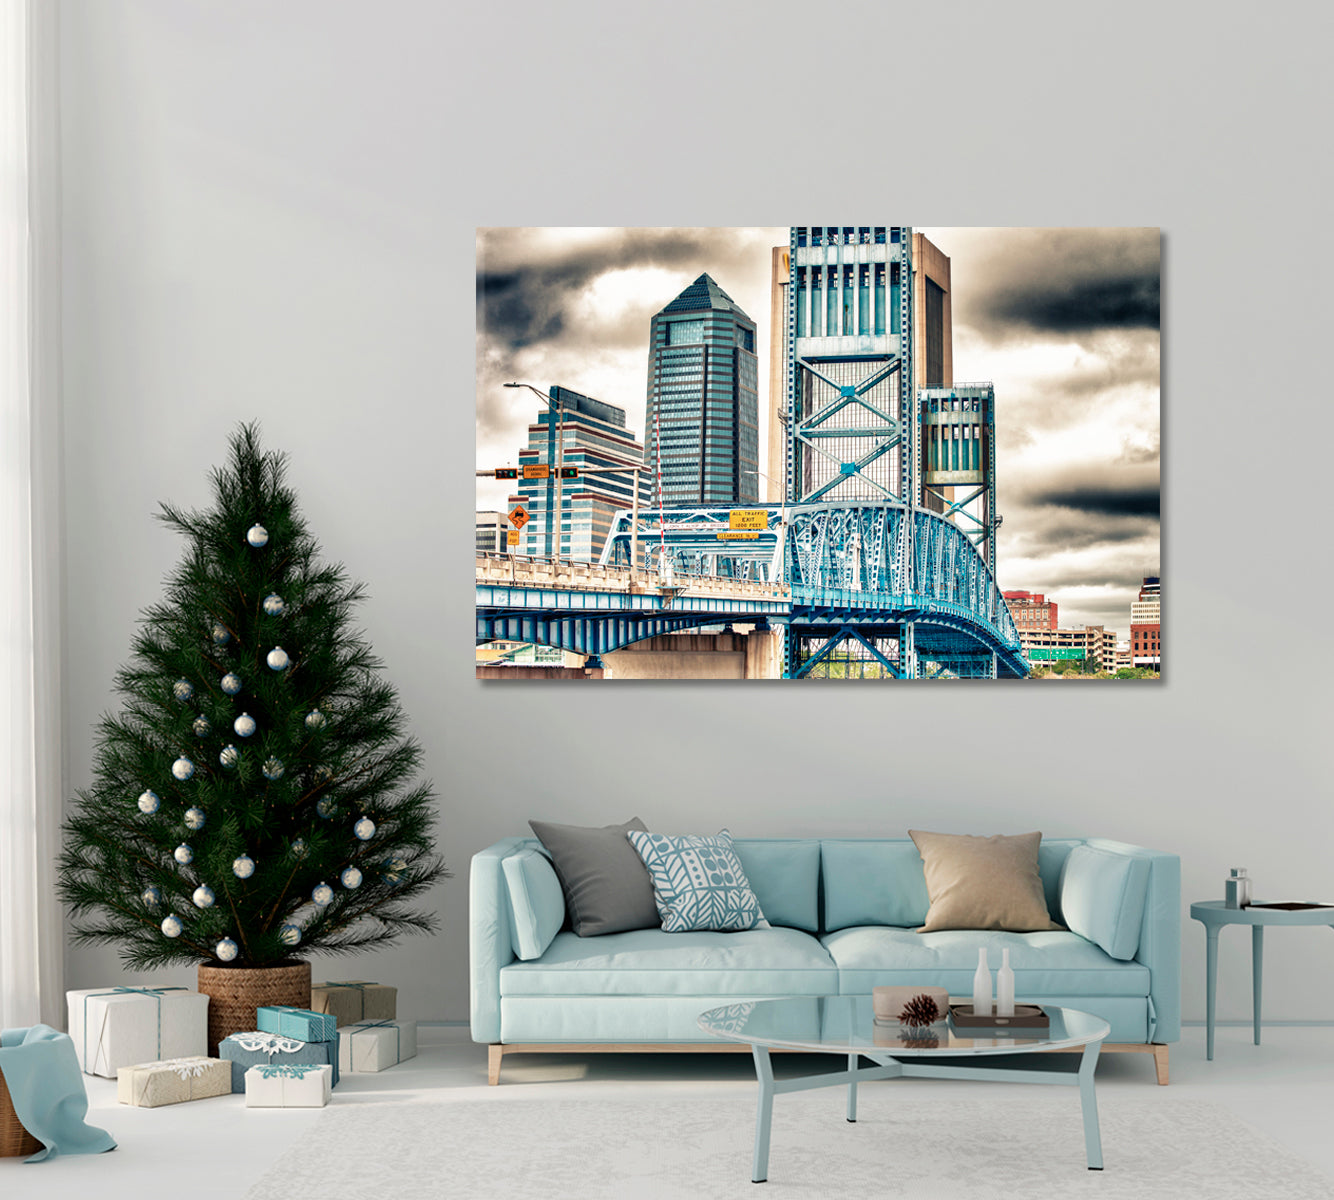 Jacksonville Skyline with Bridge on Cloudy Day Canvas Print ArtLexy 1 Panel 24"x16" inches 